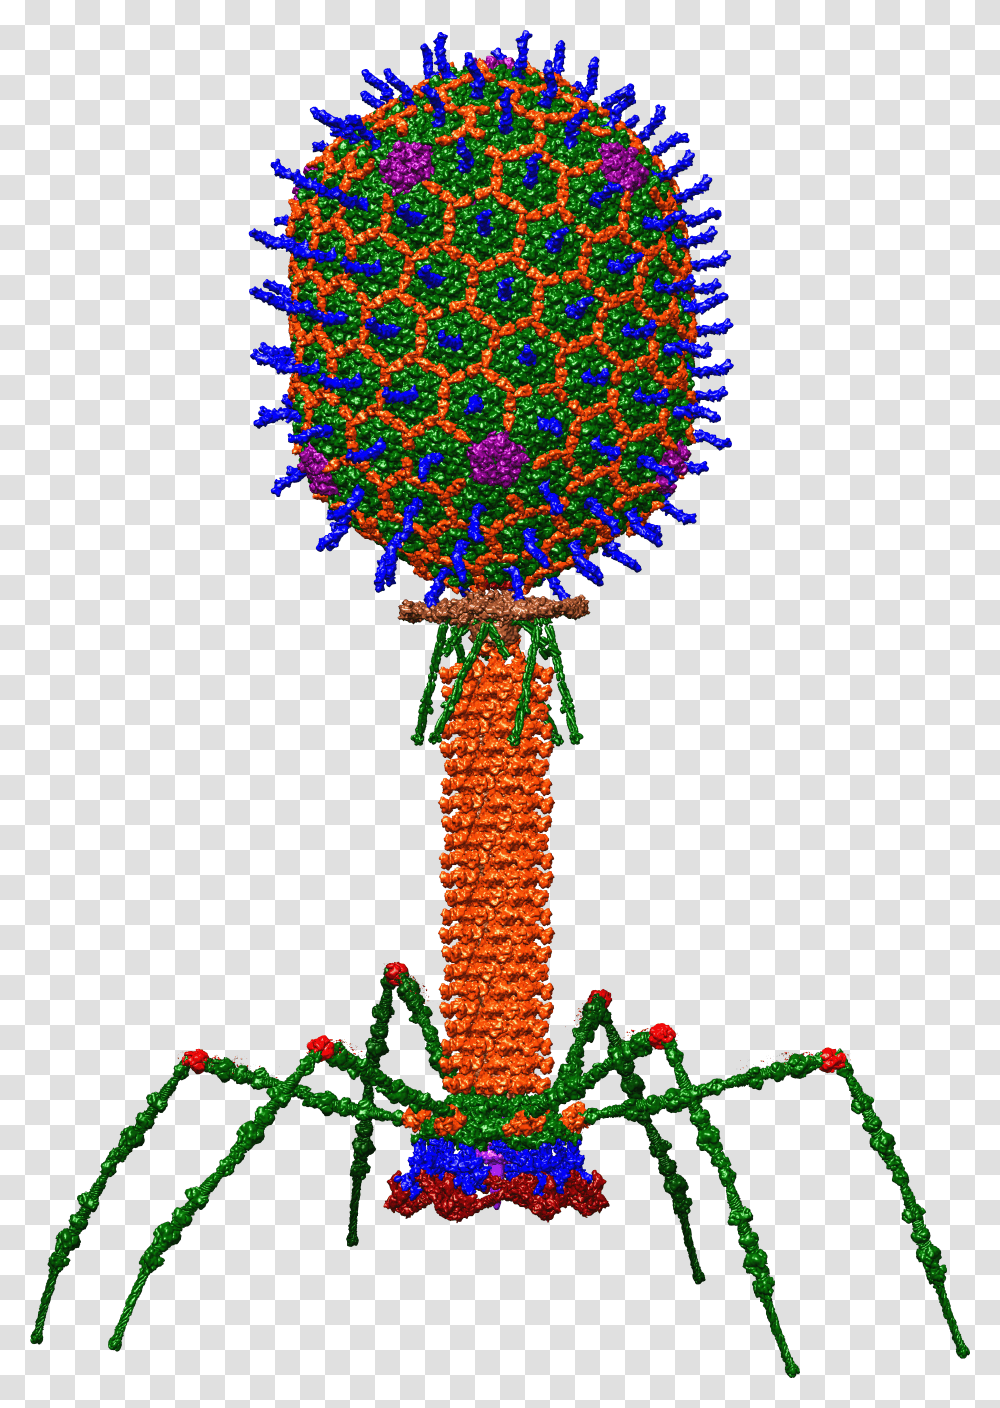 Bacteriophage Wikipedia T4 Bacteriophage, Machine, Architecture, Building, Lighting Transparent Png